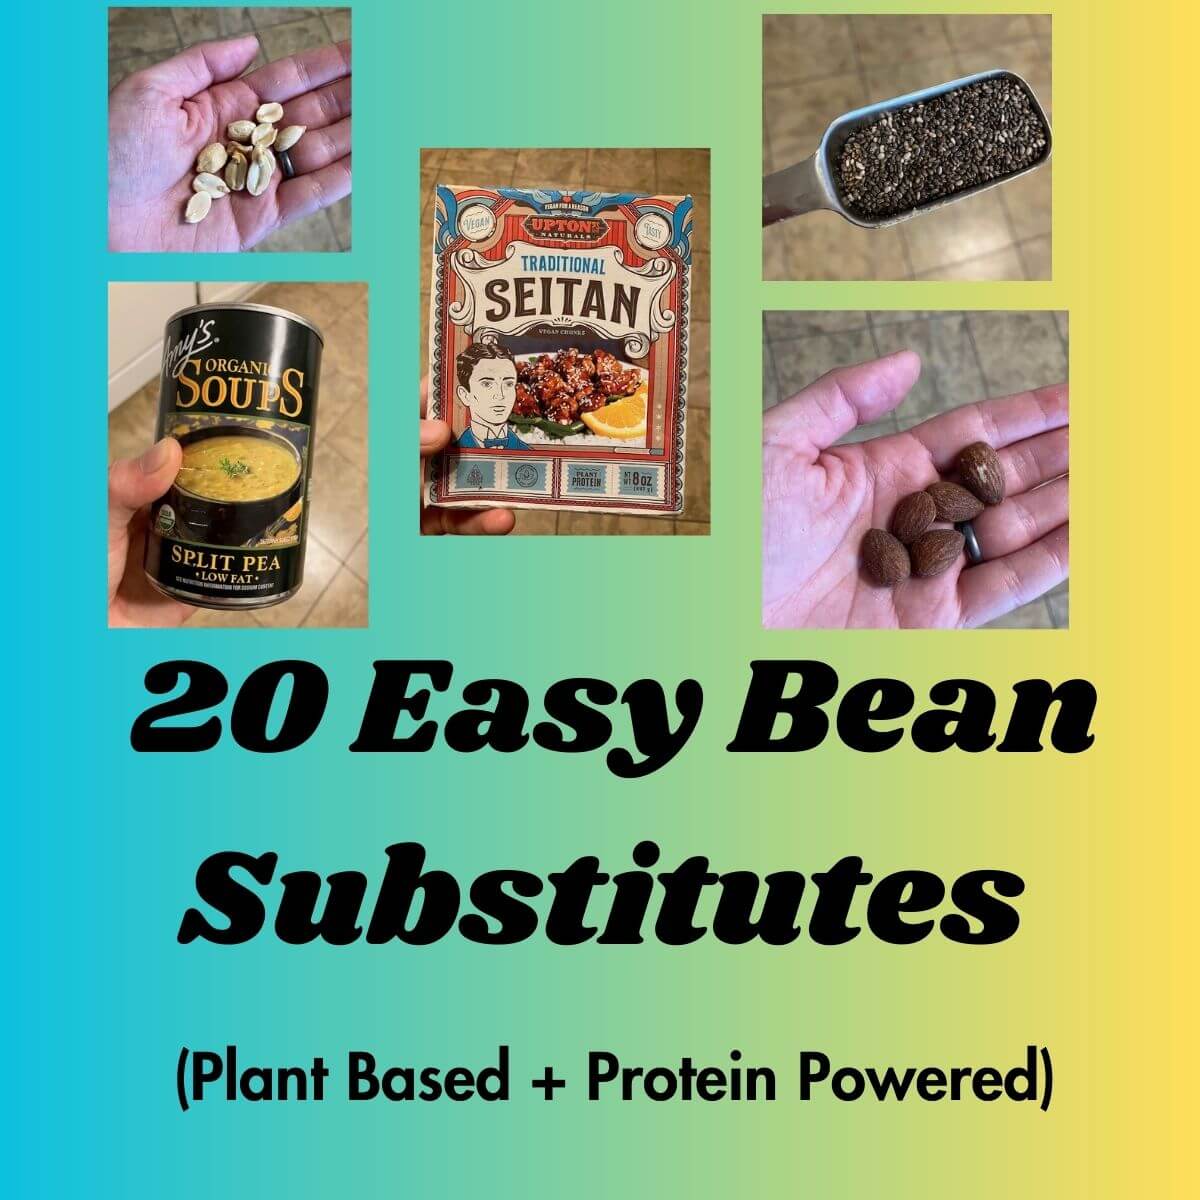 Text reads: 20 Easy Bean Substitutes Plant Based + Protein Powered. There are pictures of a hand holding almonds, peanuts, seitan package, Amys split pea soup, and a measuring spoon with chia seeds.